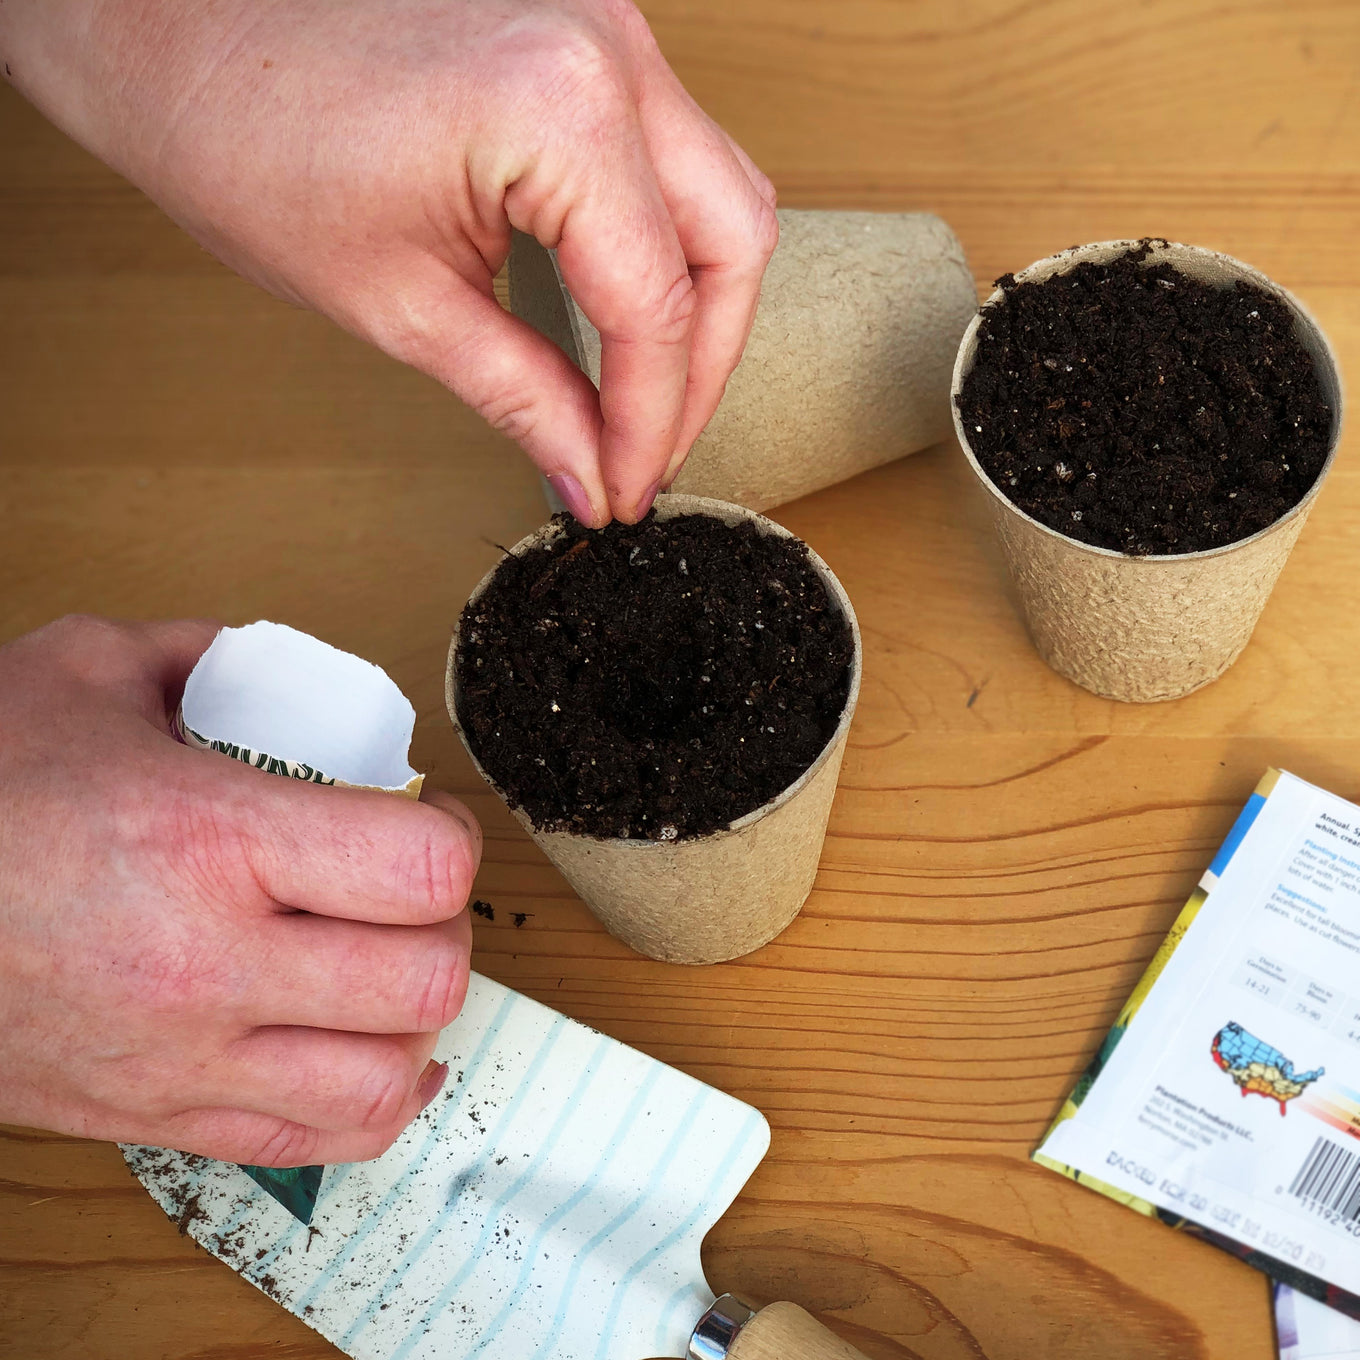 Start your Organic Beefsteak Tomato seeds in paper or peat pots so they biodegrade, the pots biodegrade, after you have planted them.